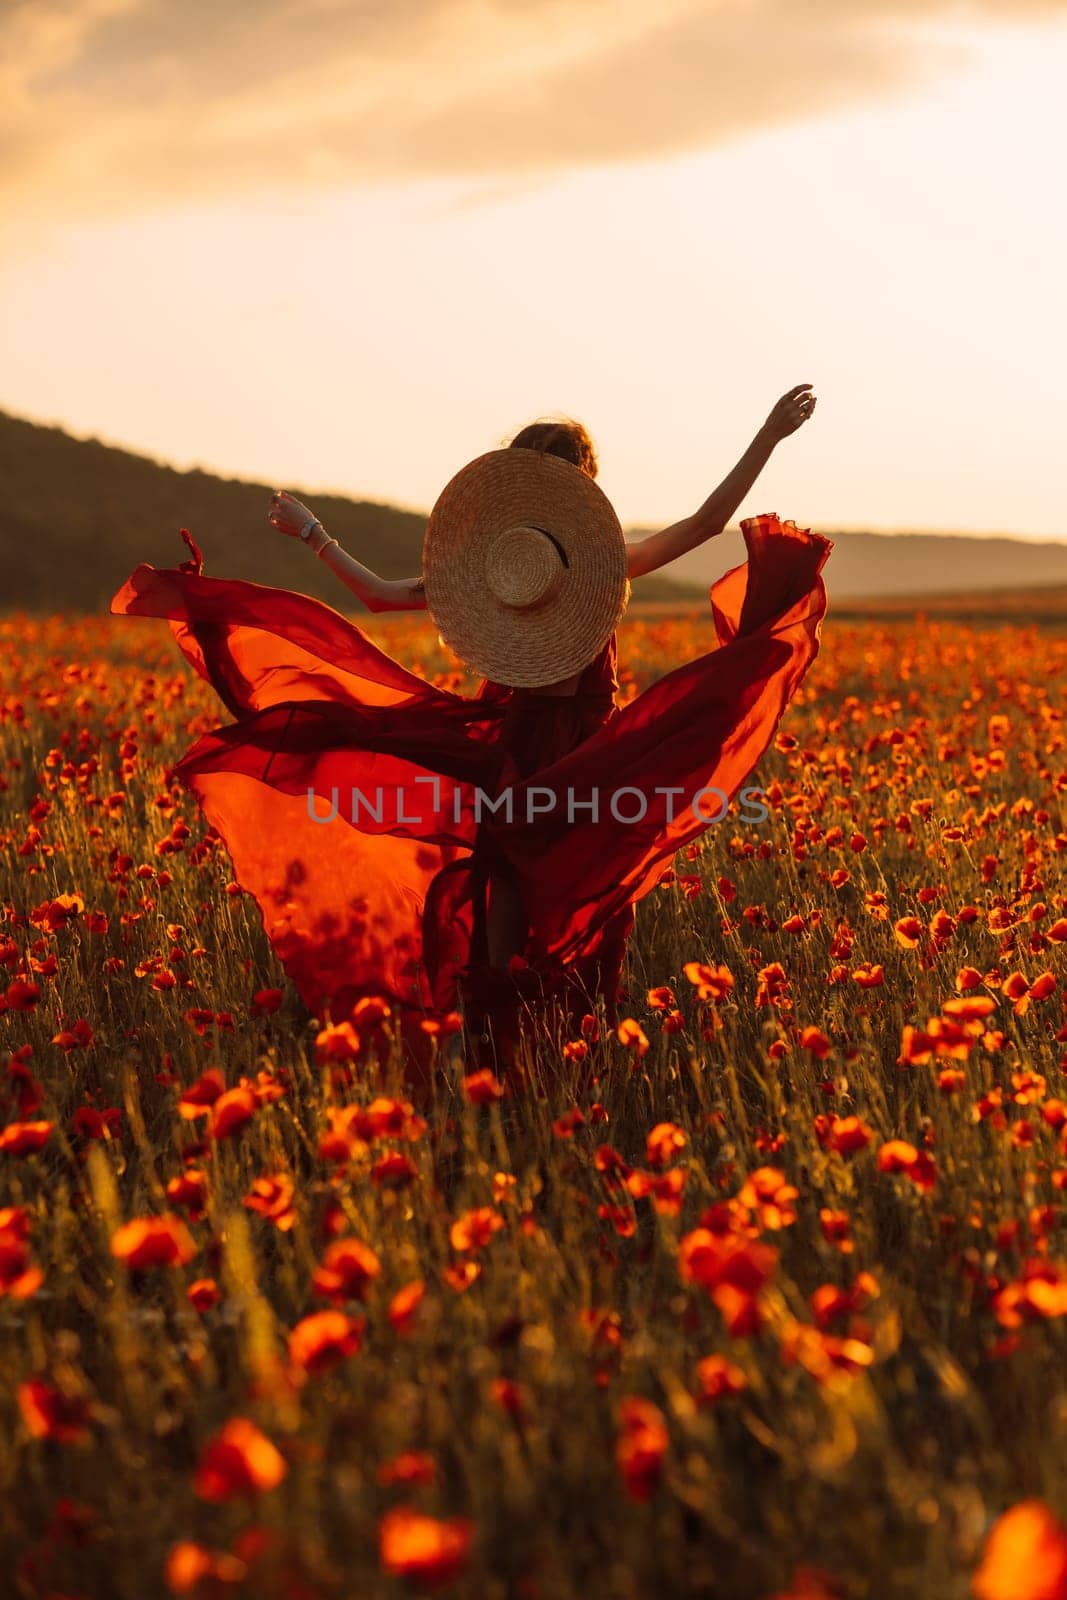 A woman in a red dress is running through a field of red flowers. She is wearing a straw hat and has her arms outstretched. The scene is bright and cheerful, with the sun shining down on the flowers